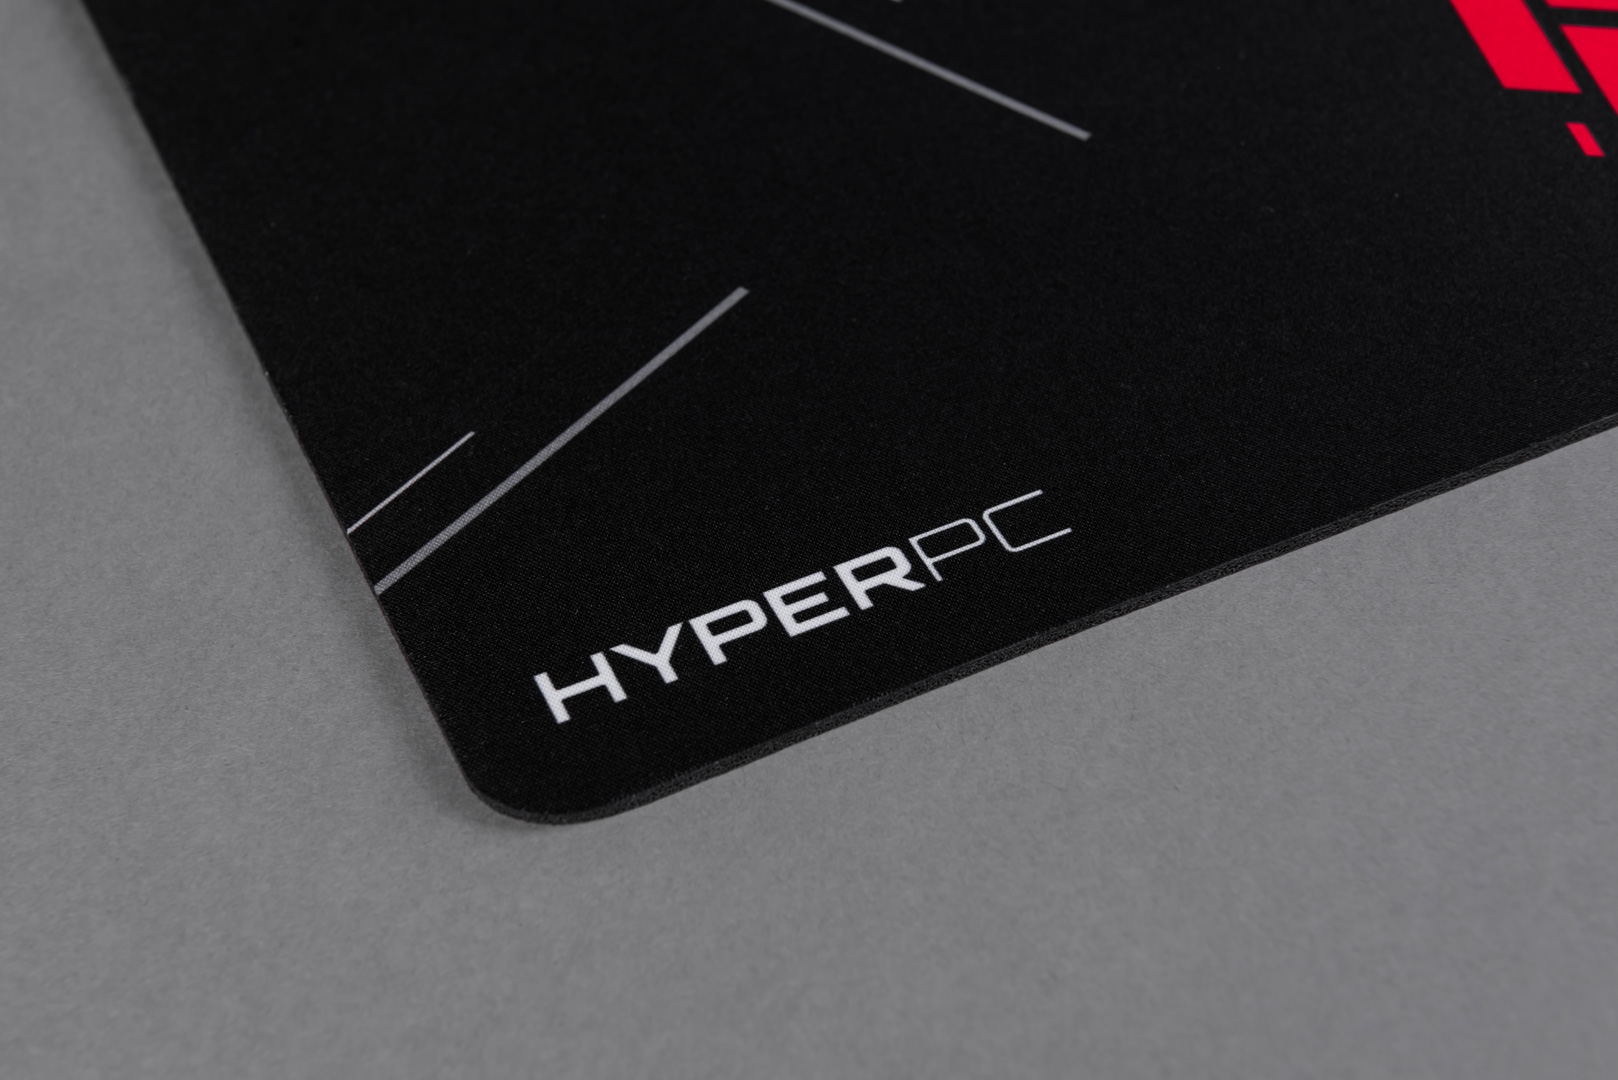 hyperpc mouse pad 02